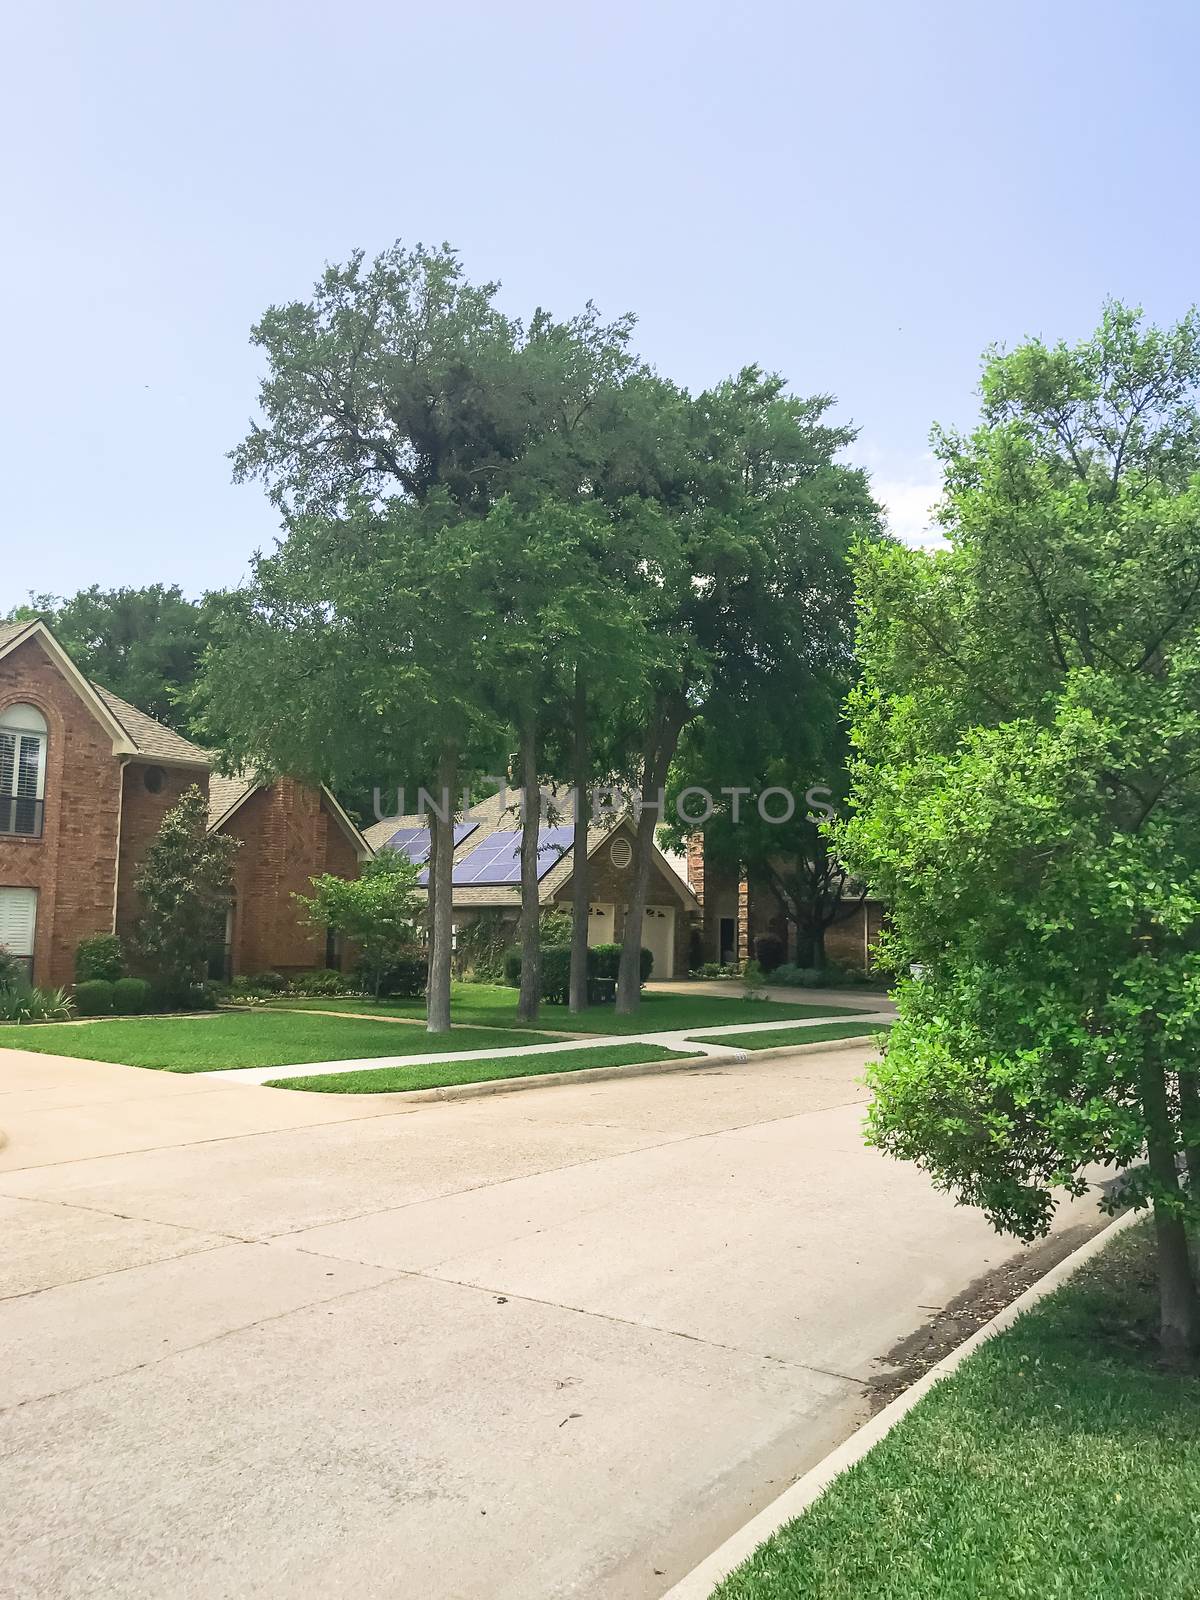 Typical upscale suburban residential neighborhood near Dallas, Texas, America with solar panel roof house and mature trees.